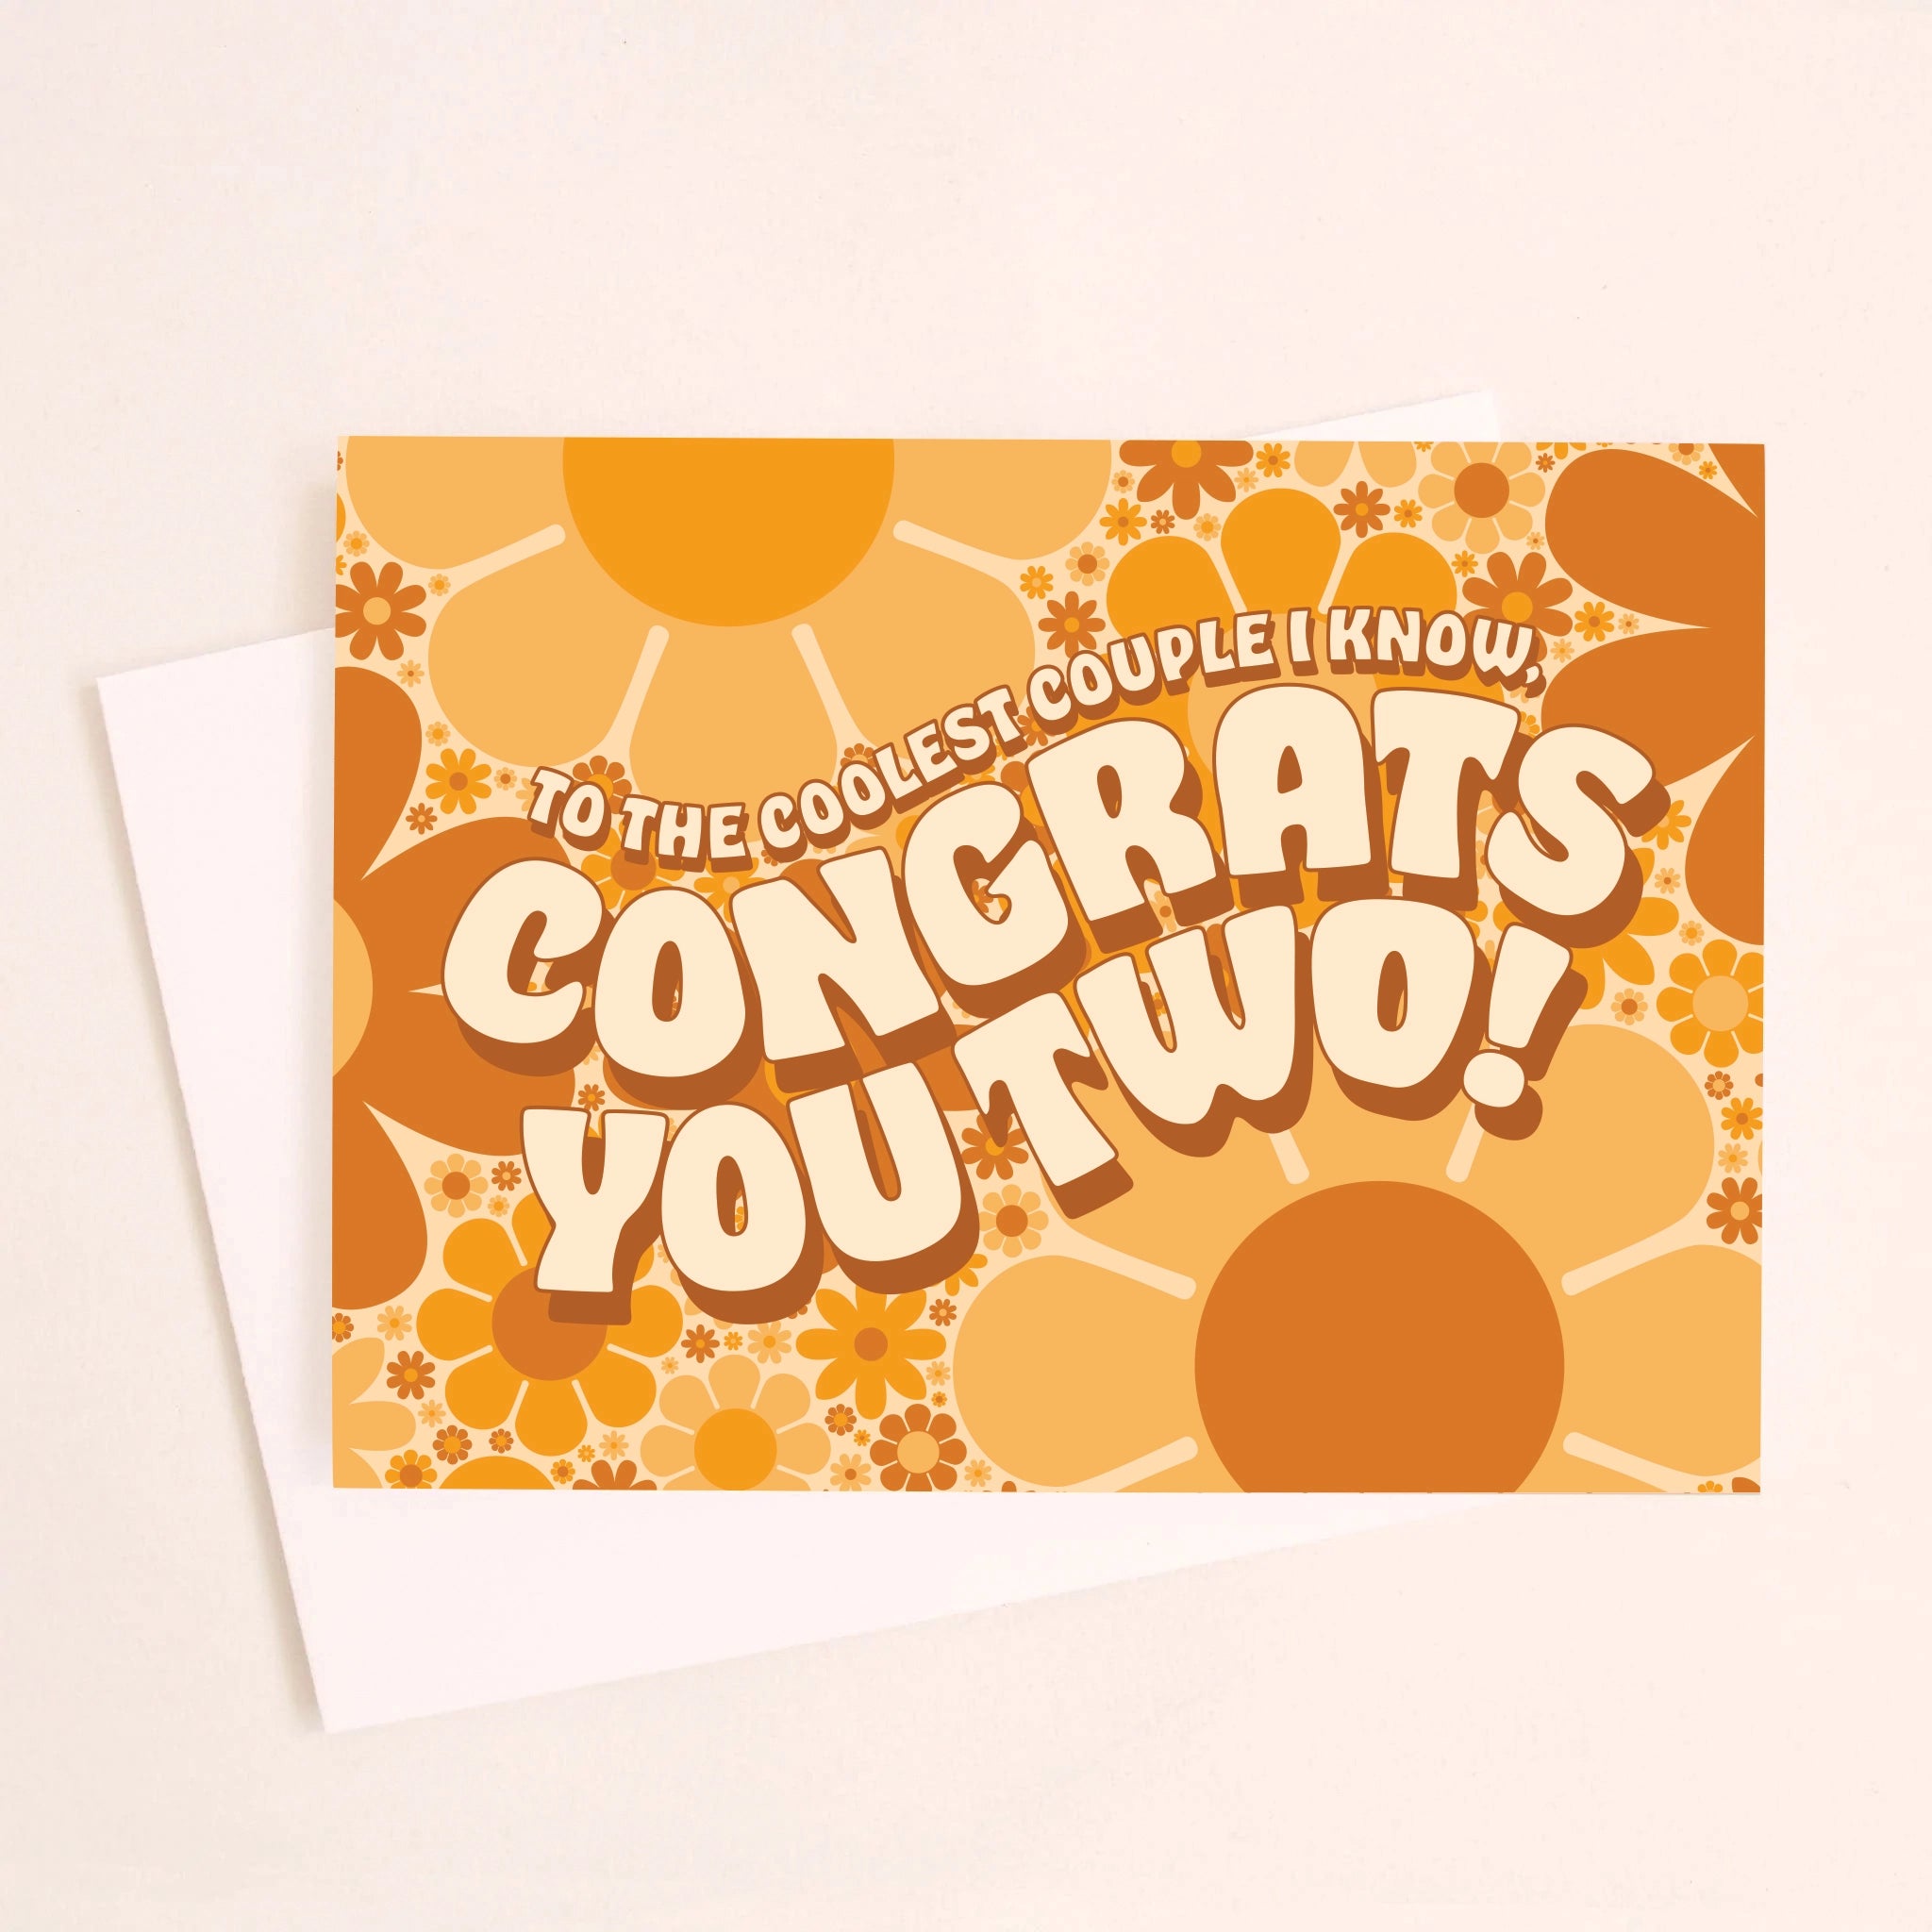 On an ivory background is a daisy print congratulations card with shades of orange and brown along with wavy text in the center that reads, &quot;To The Coolest Couple I Know, Congrats You Two!&quot;.